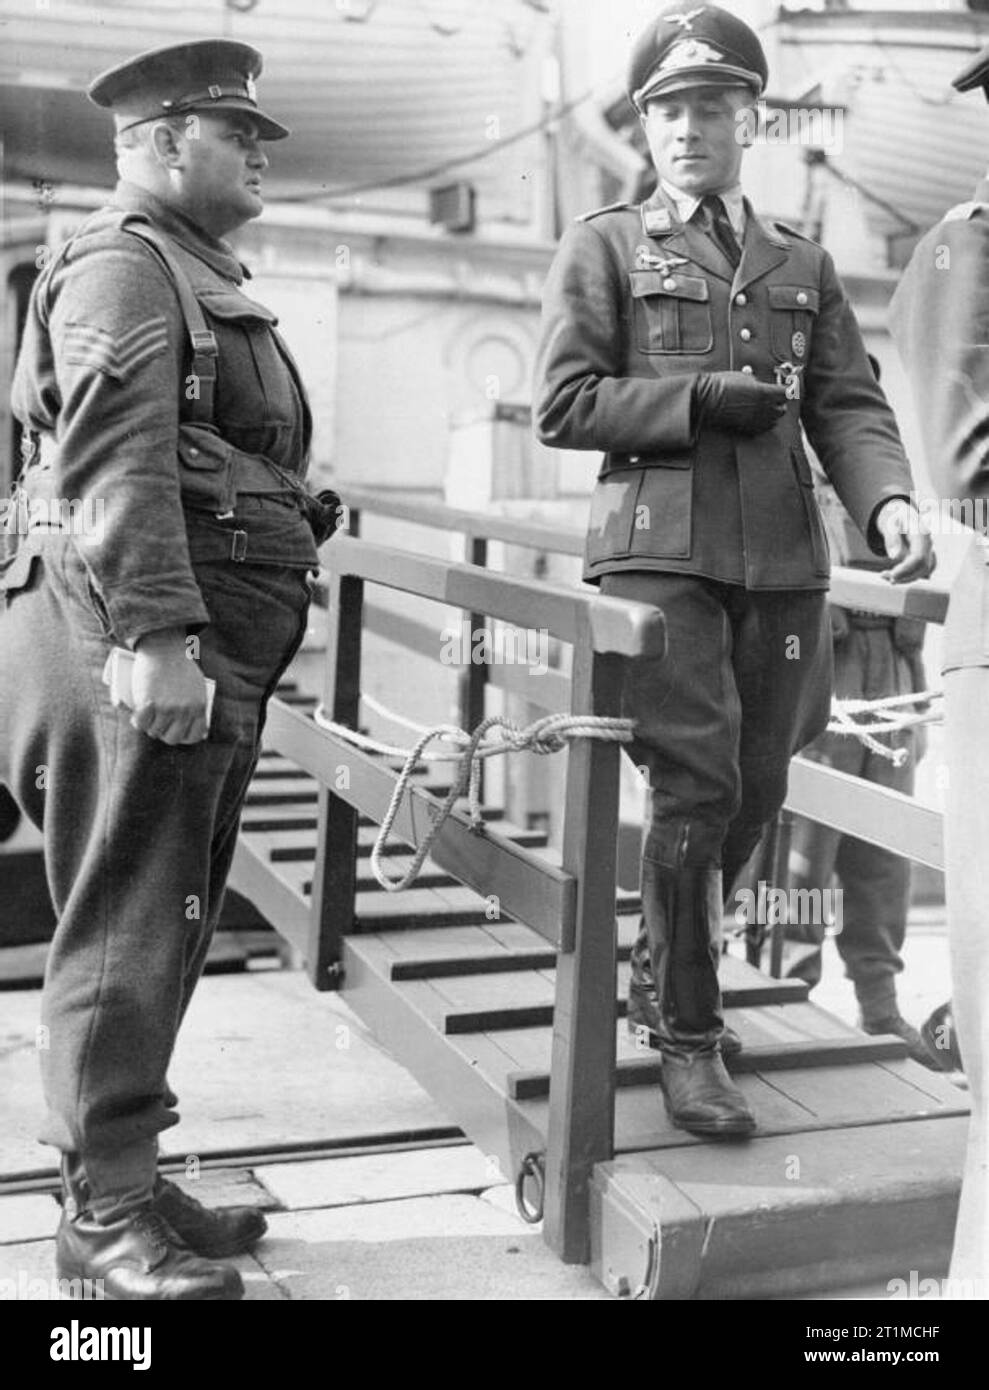 The British Army in the United Kingdom 1939-45 A Luftwaffe officer prisoner is escorted down the gangplank of a hospital ship to exercise on the quayside at Newhaven, 5 October 1941. He was one of a number of German POWs awaiting repatriation in a prisoner exchange. Stock Photo